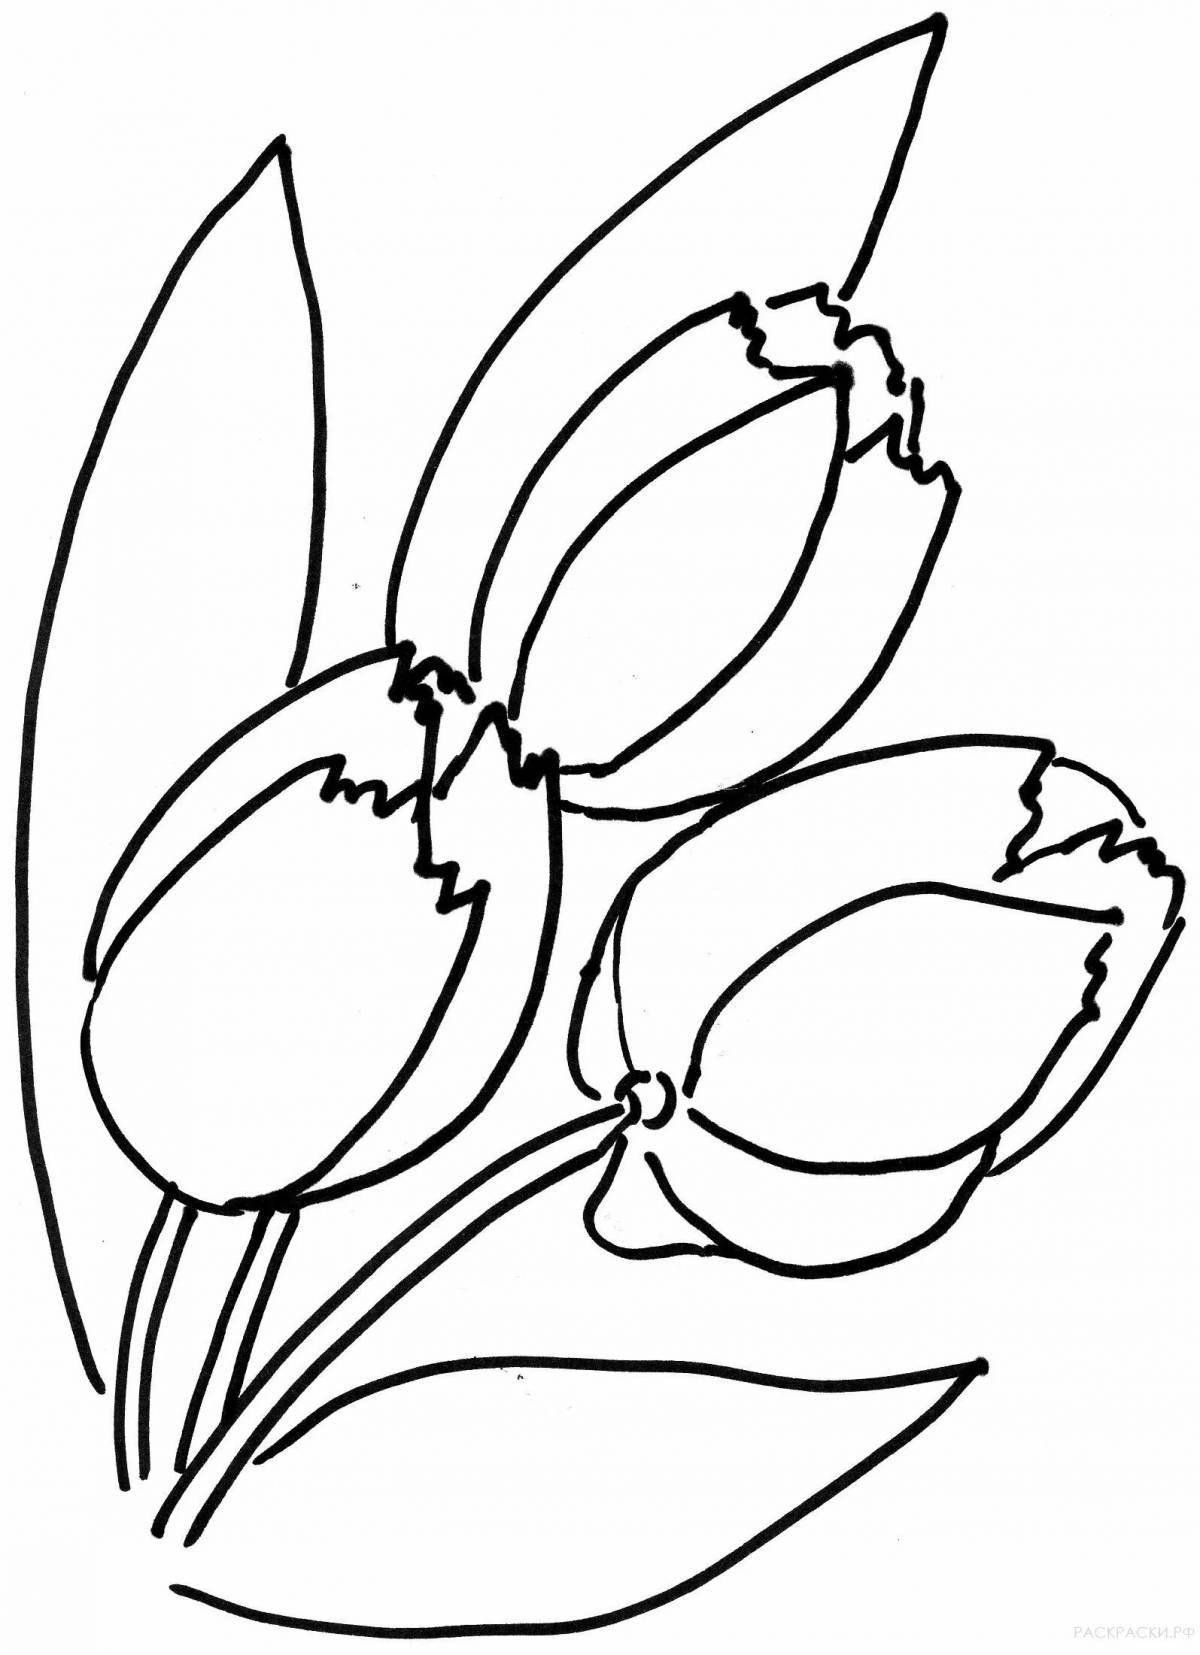 Glowing tulip coloring page